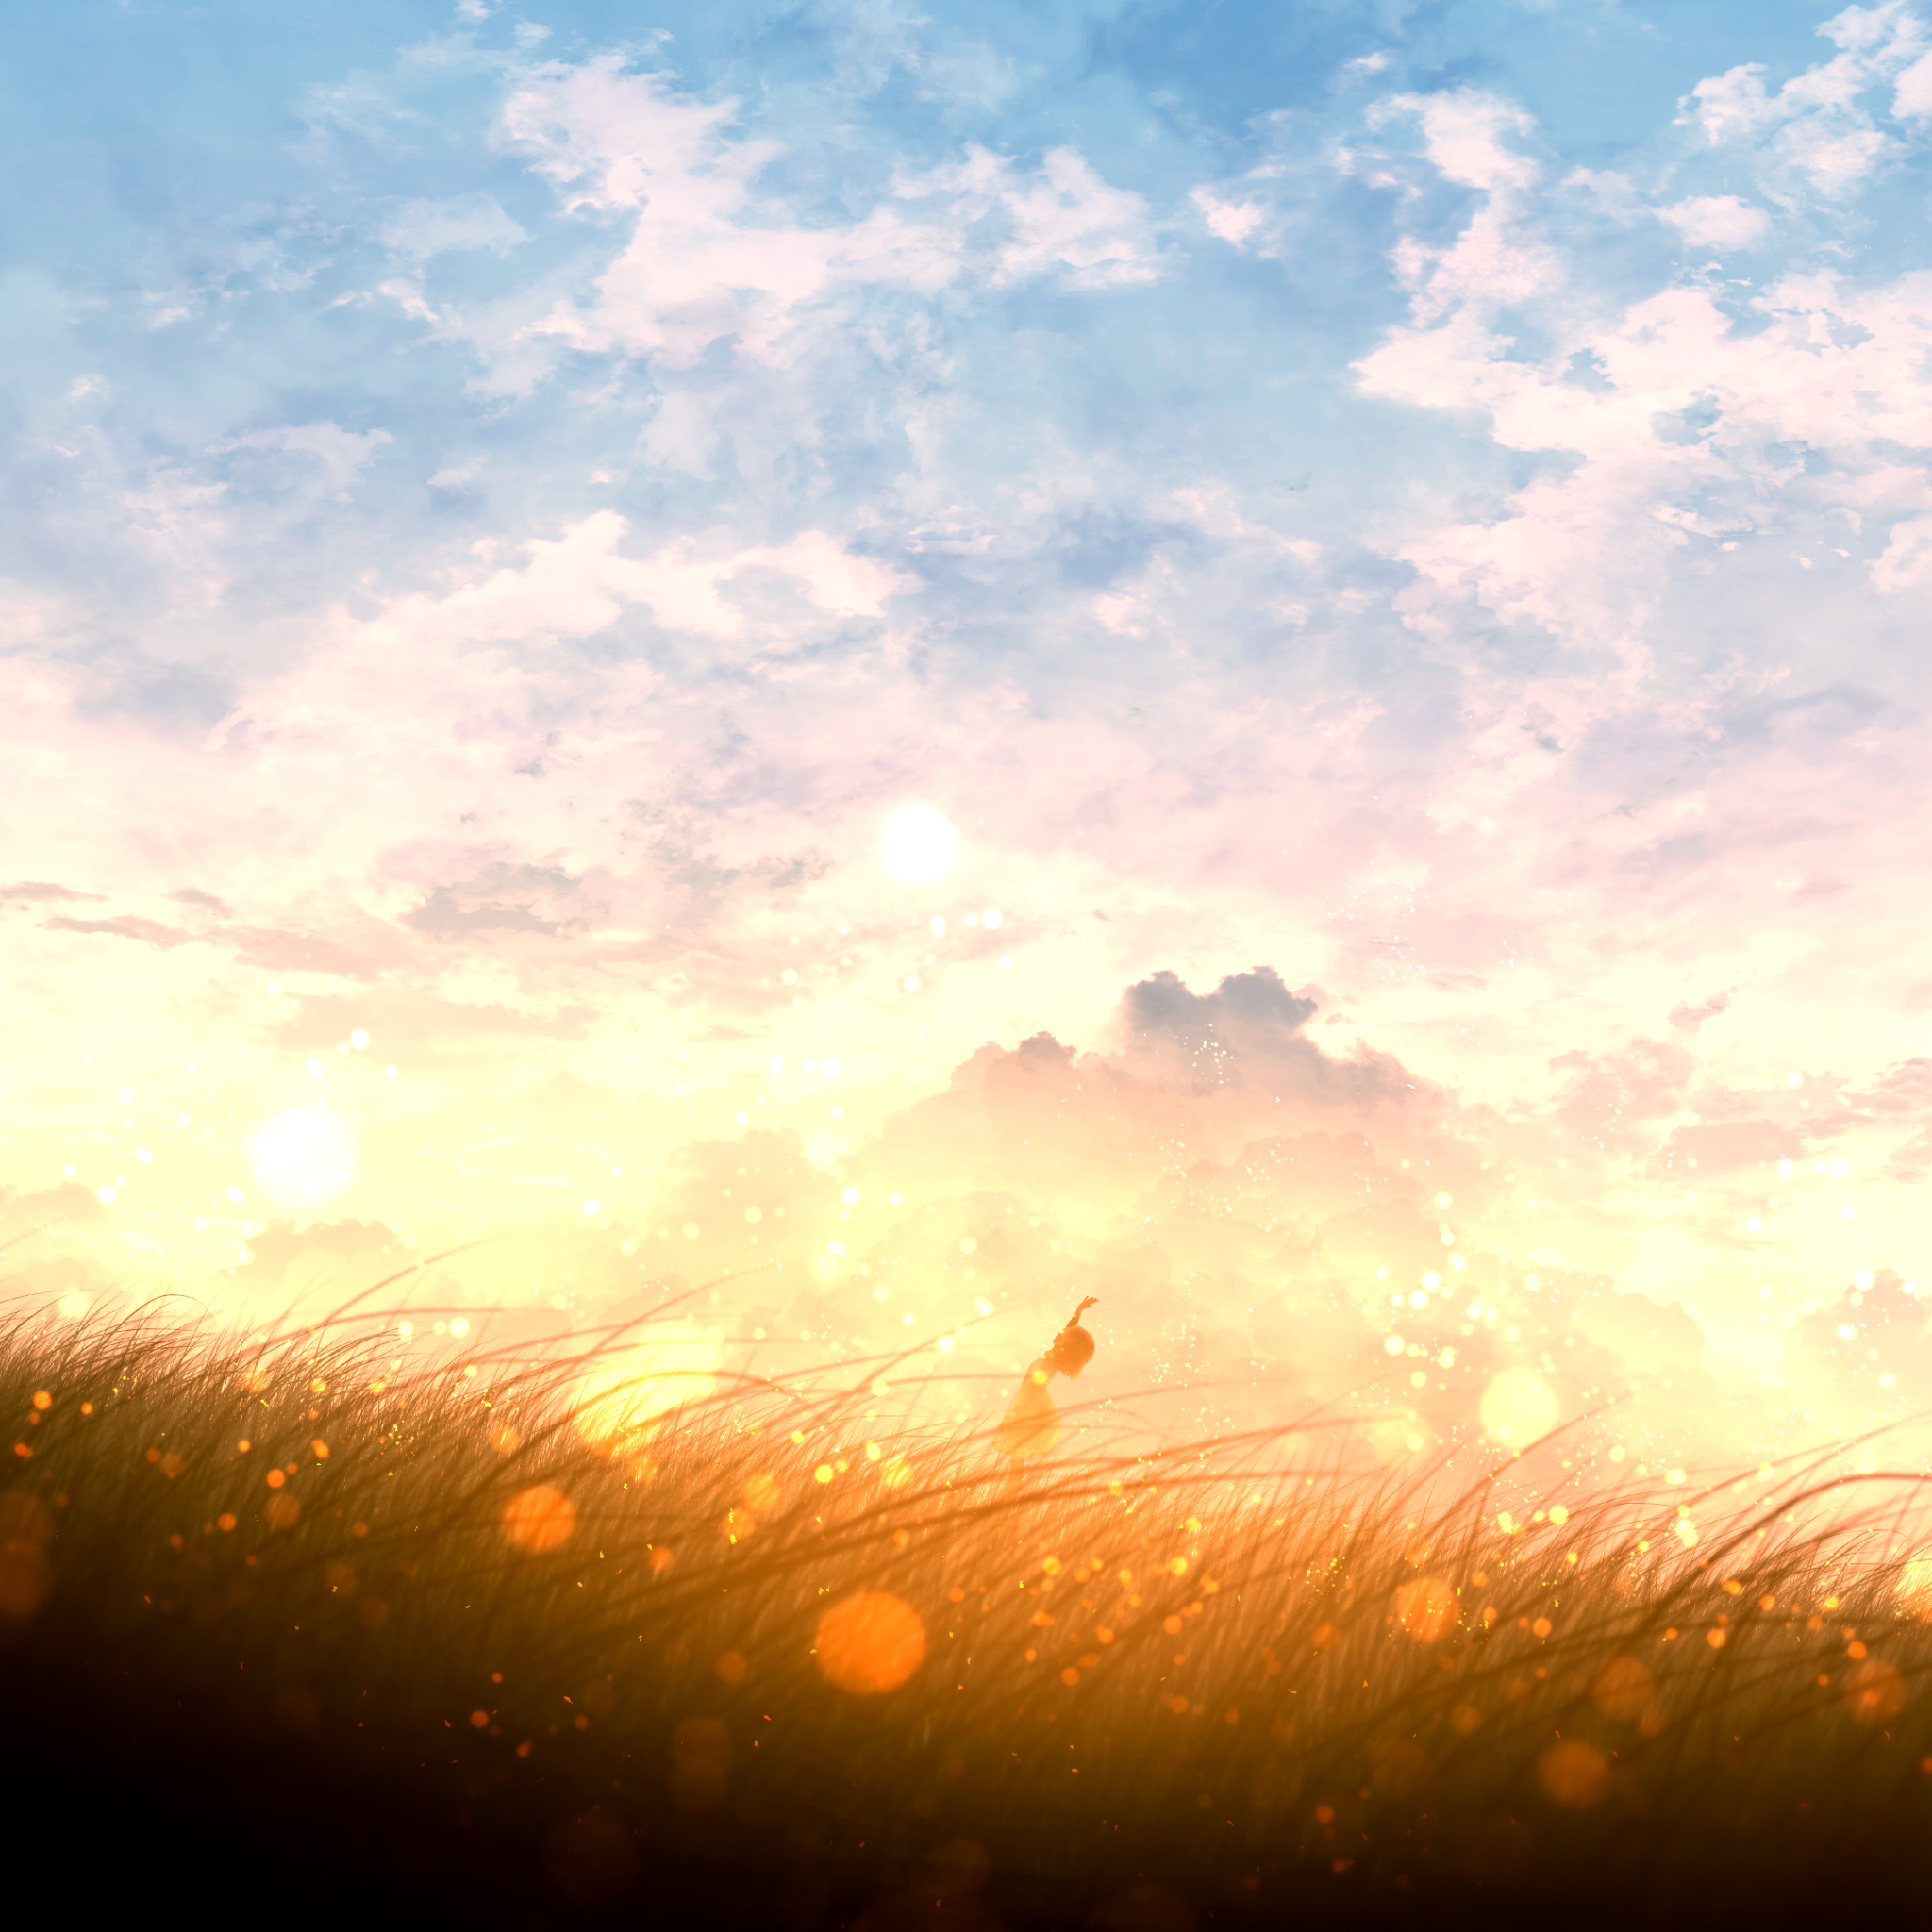 Anime girl looking up at the sky in a glowing golden field by furi / ふーり